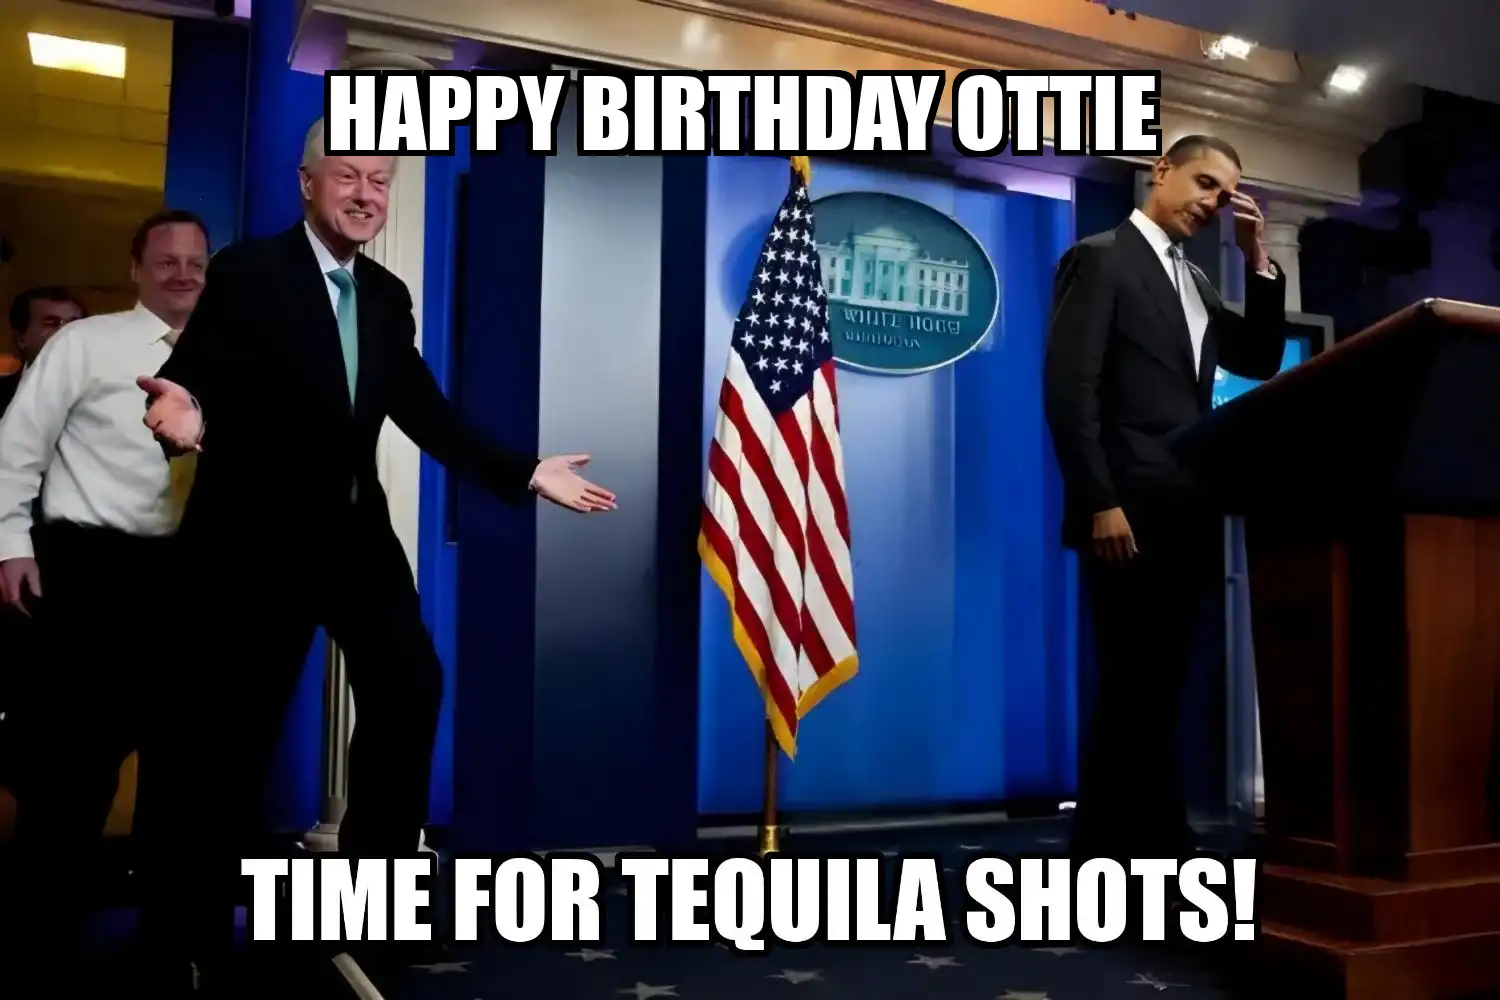 Happy Birthday Ottie Time For Tequila Shots Memes